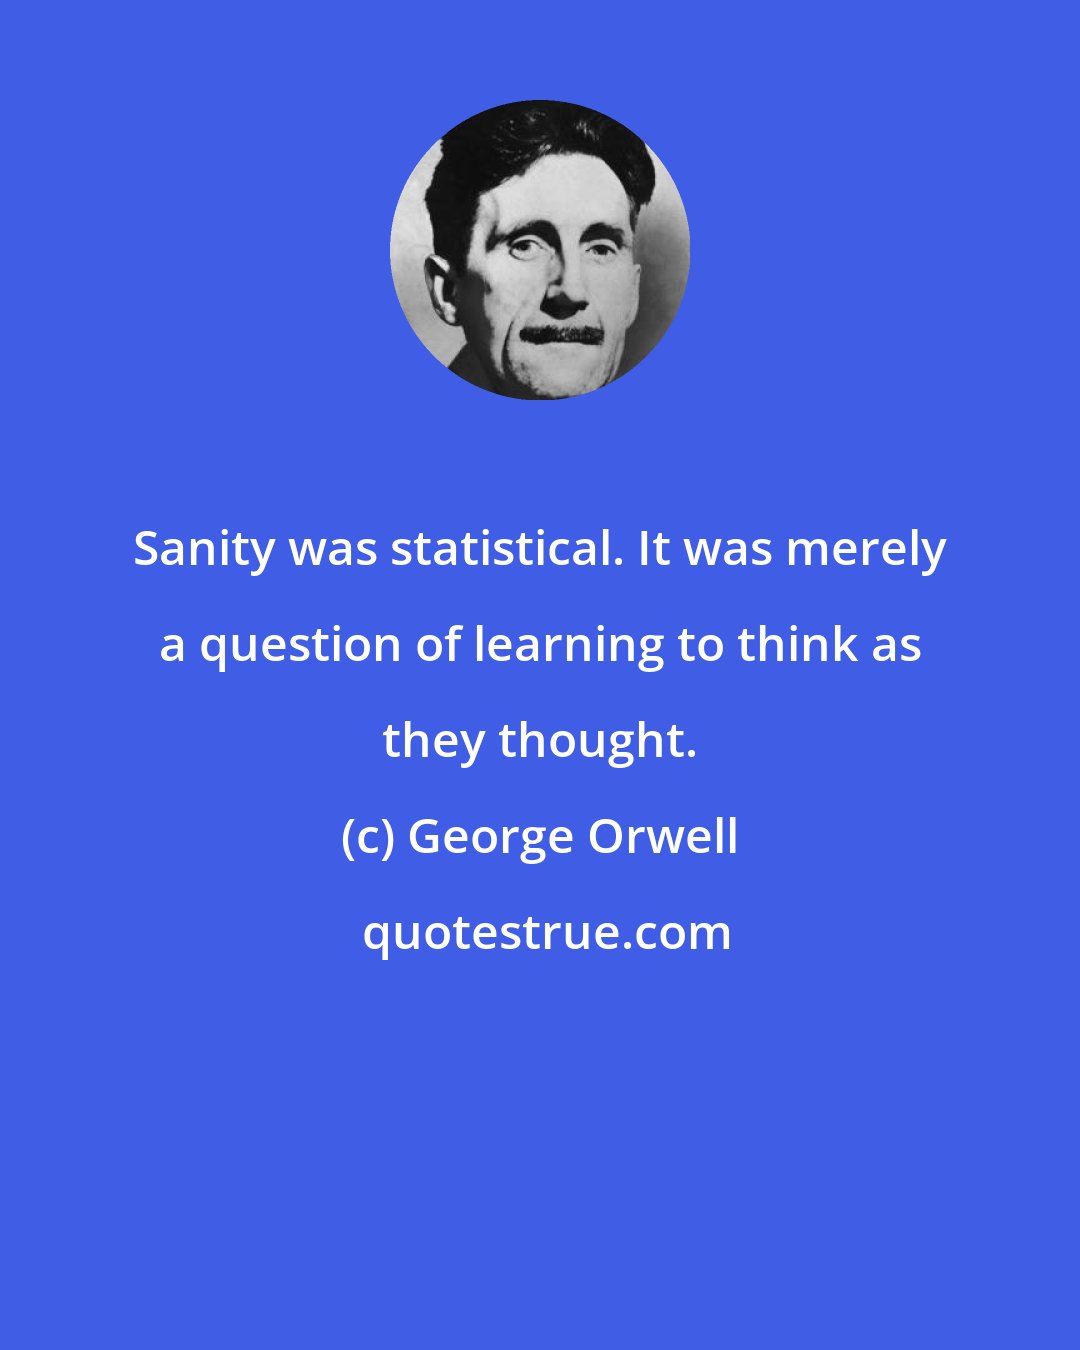 George Orwell: Sanity was statistical. It was merely a question of learning to think as they thought.